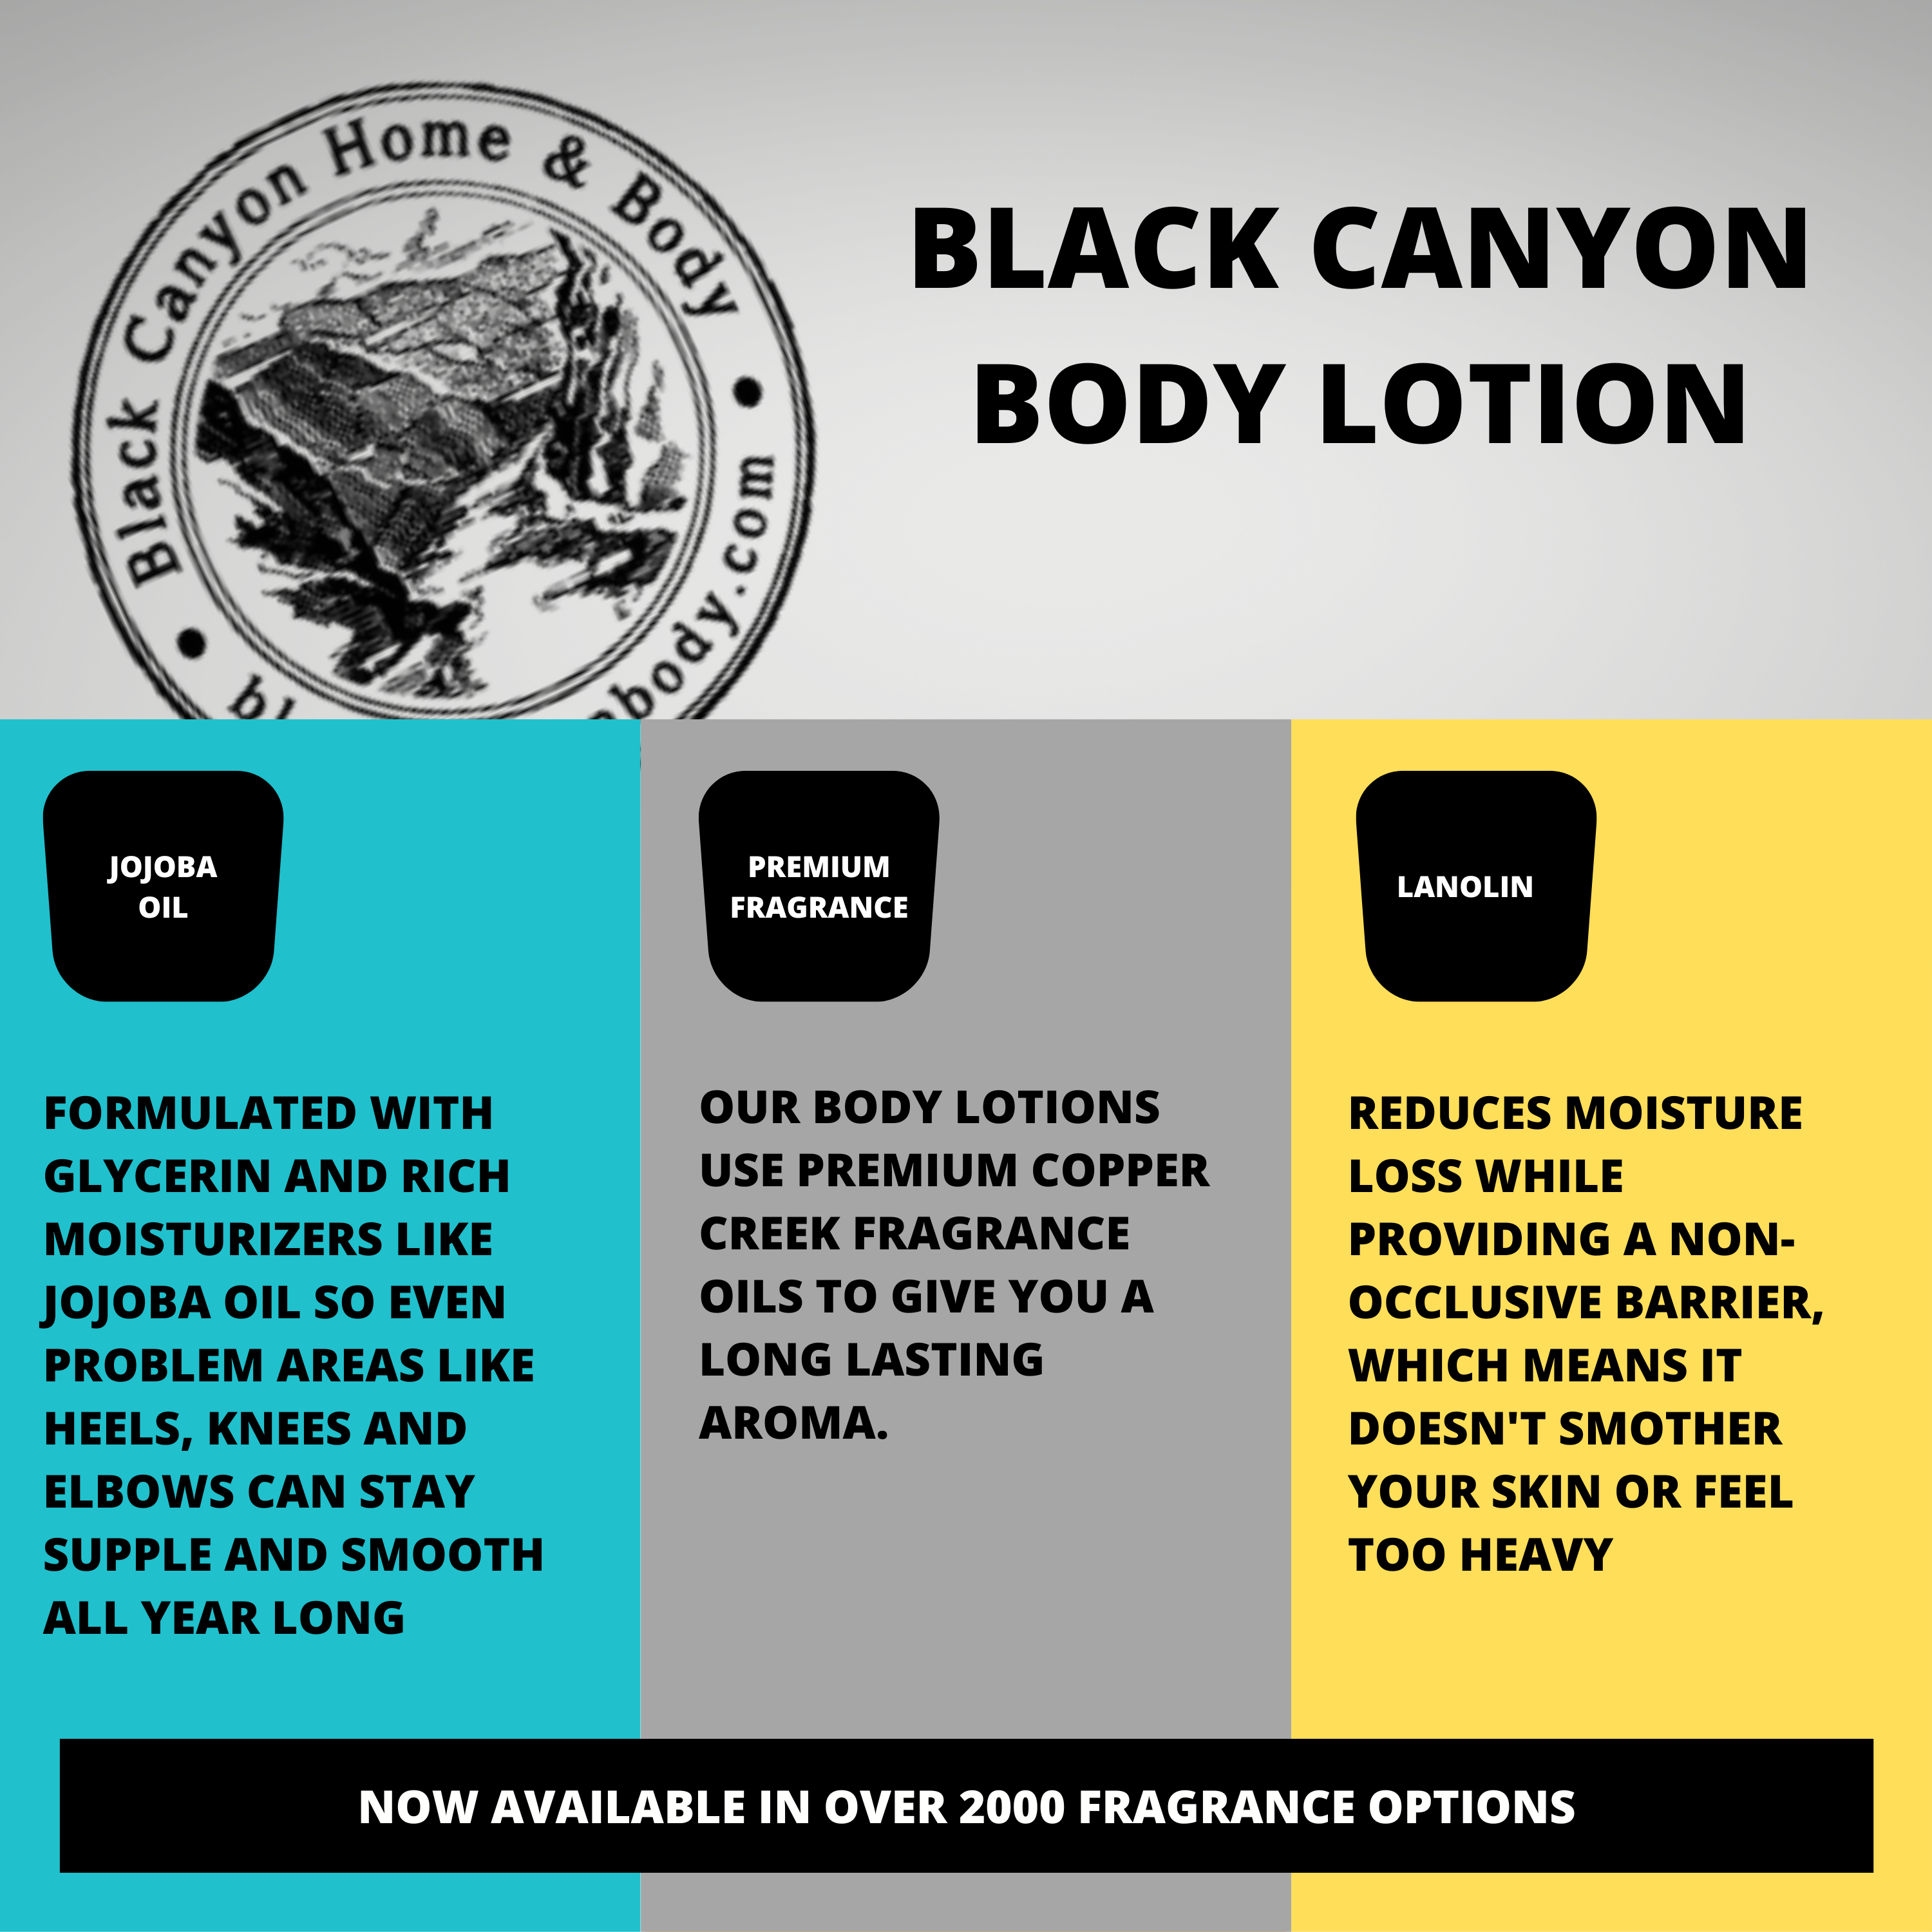 Black Canyon Apple & Daisies Scented Luxury Body Lotion with Lanolin and Jojoba Oil